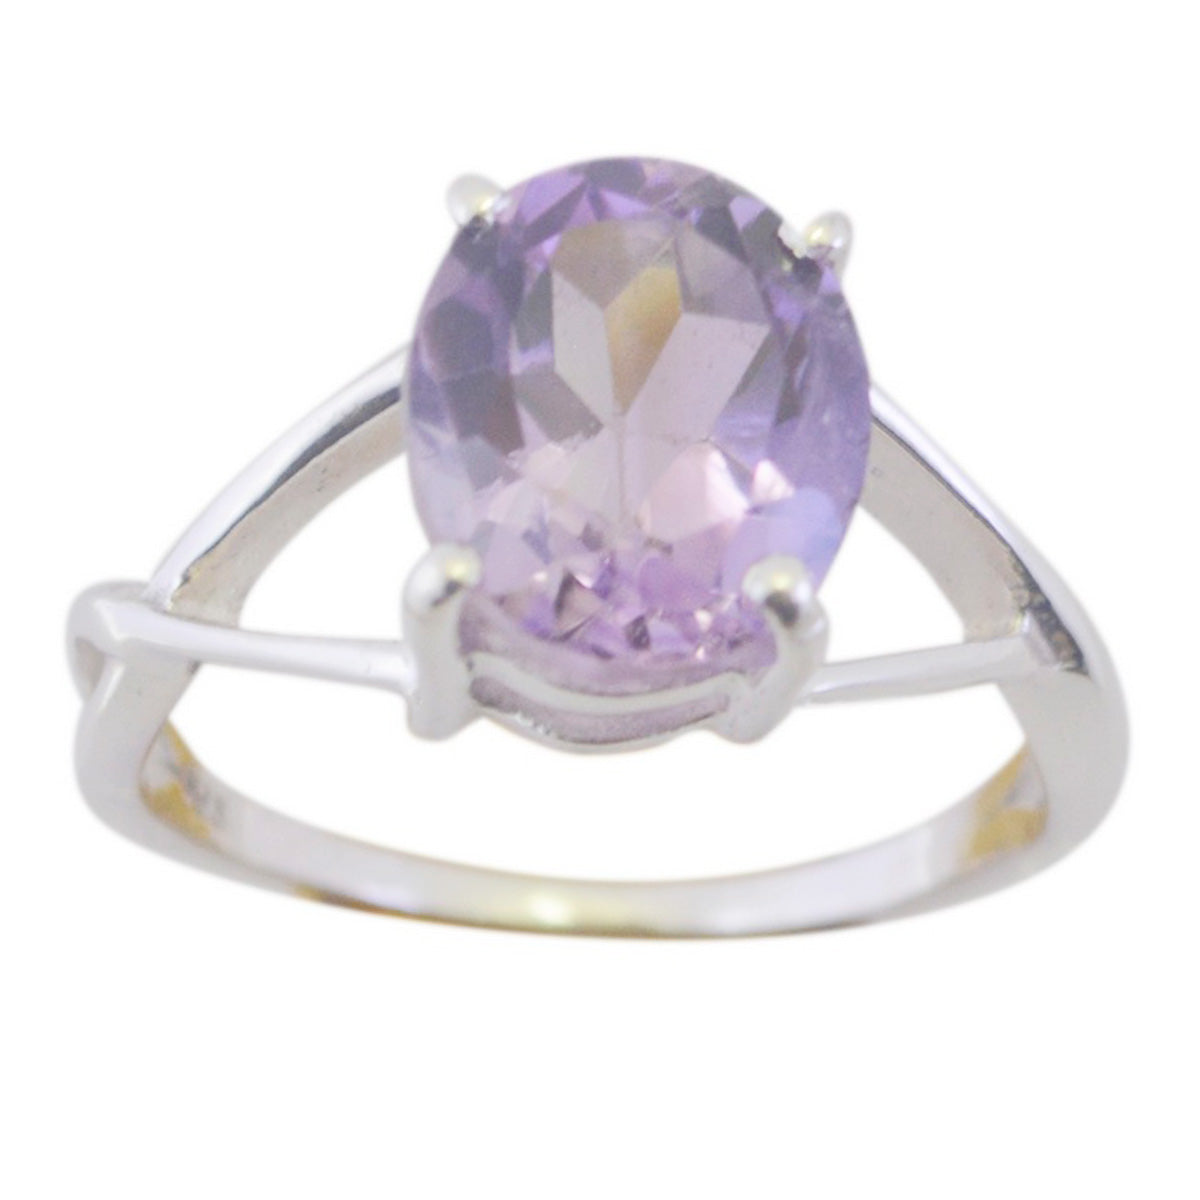 Indian Stone Amethyst 925 Sterling Silver Ring American Indian Jewelry